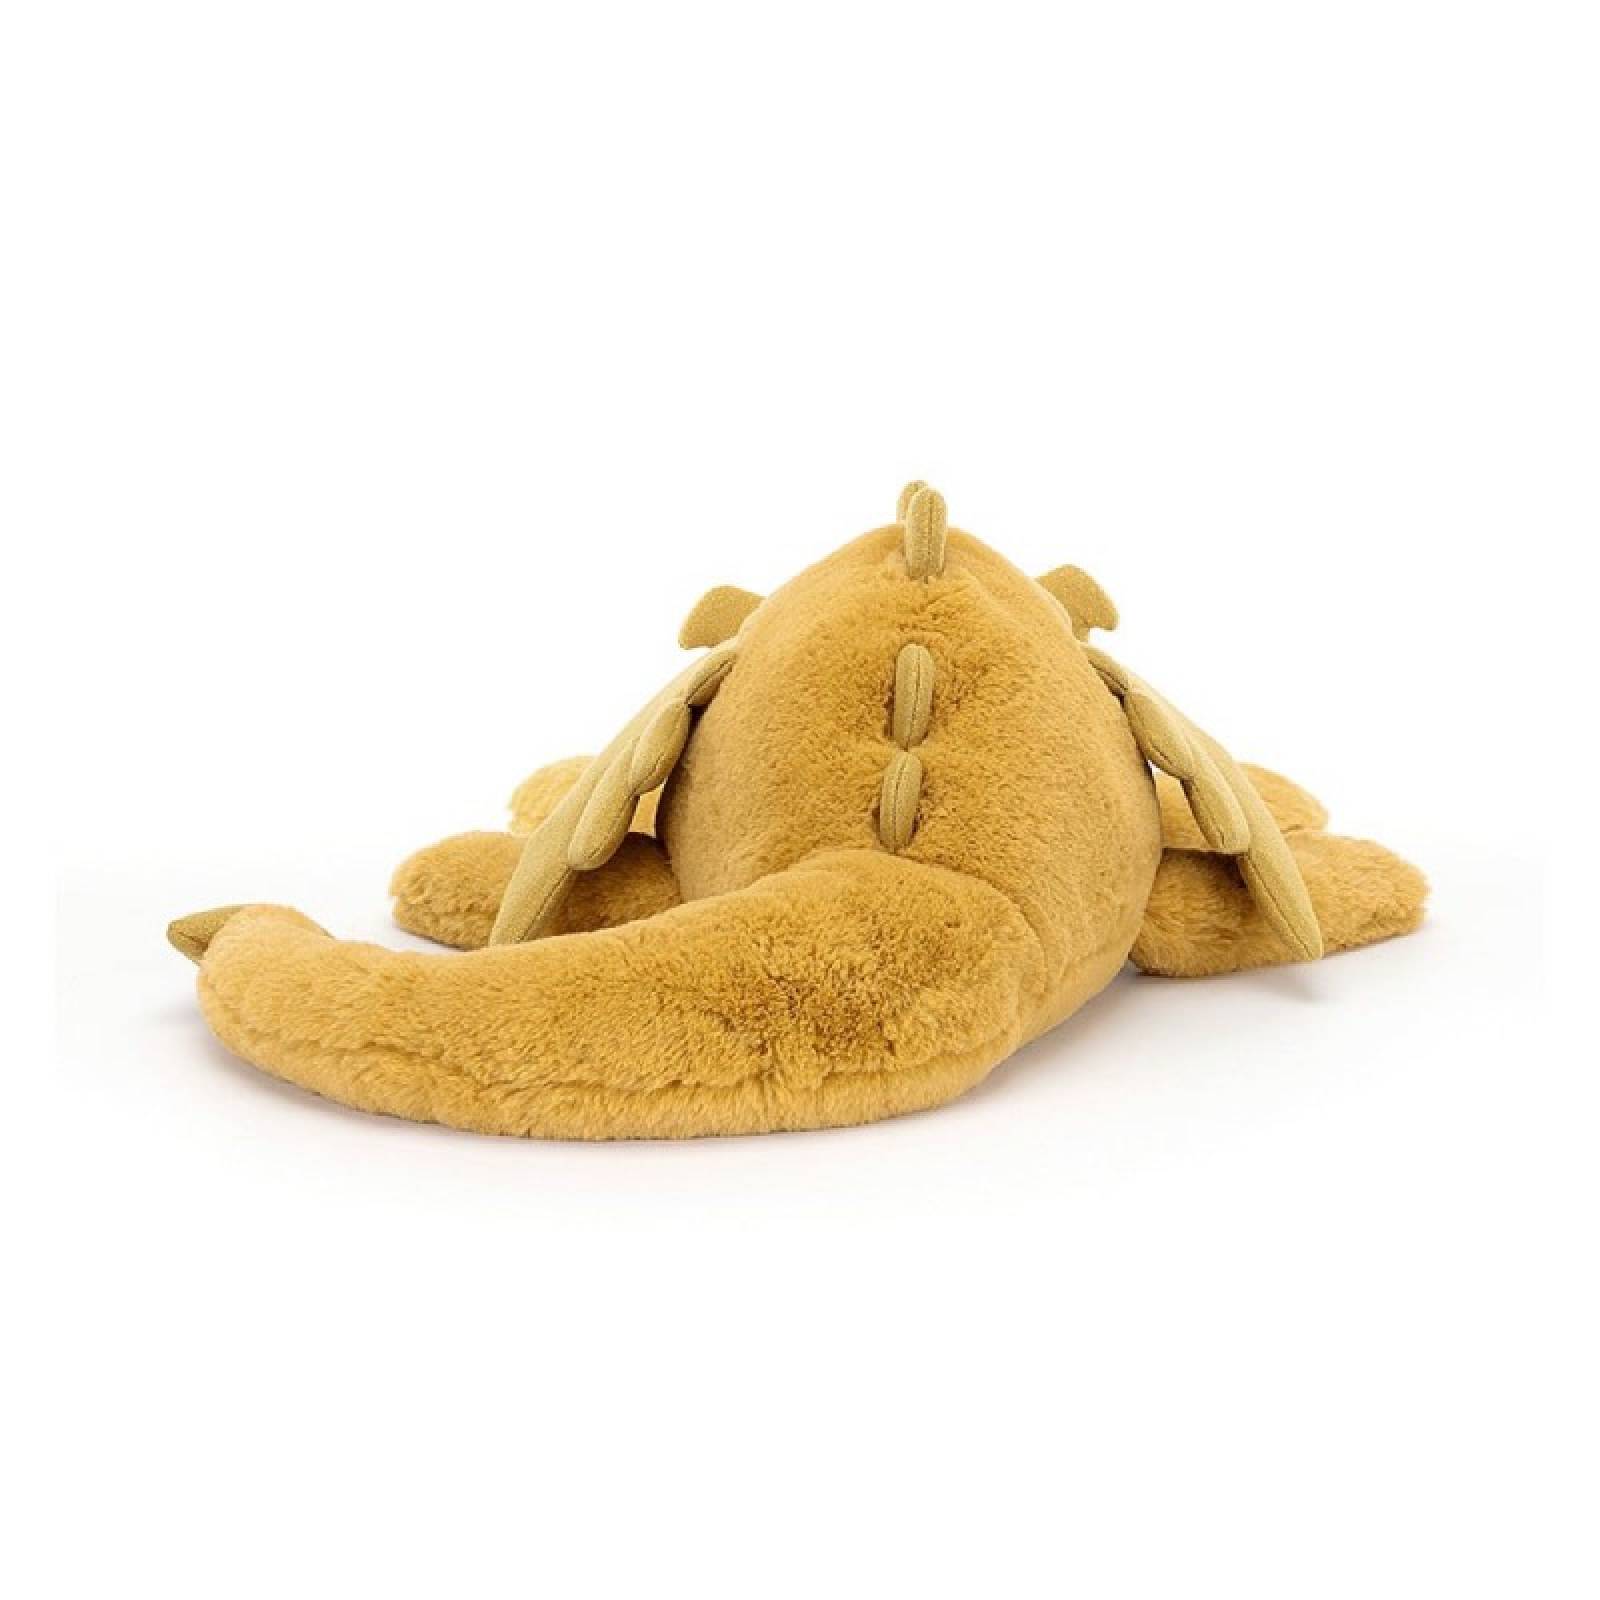 Huge Golden Dragon Soft Toy By Jellycat 0+ thumbnails